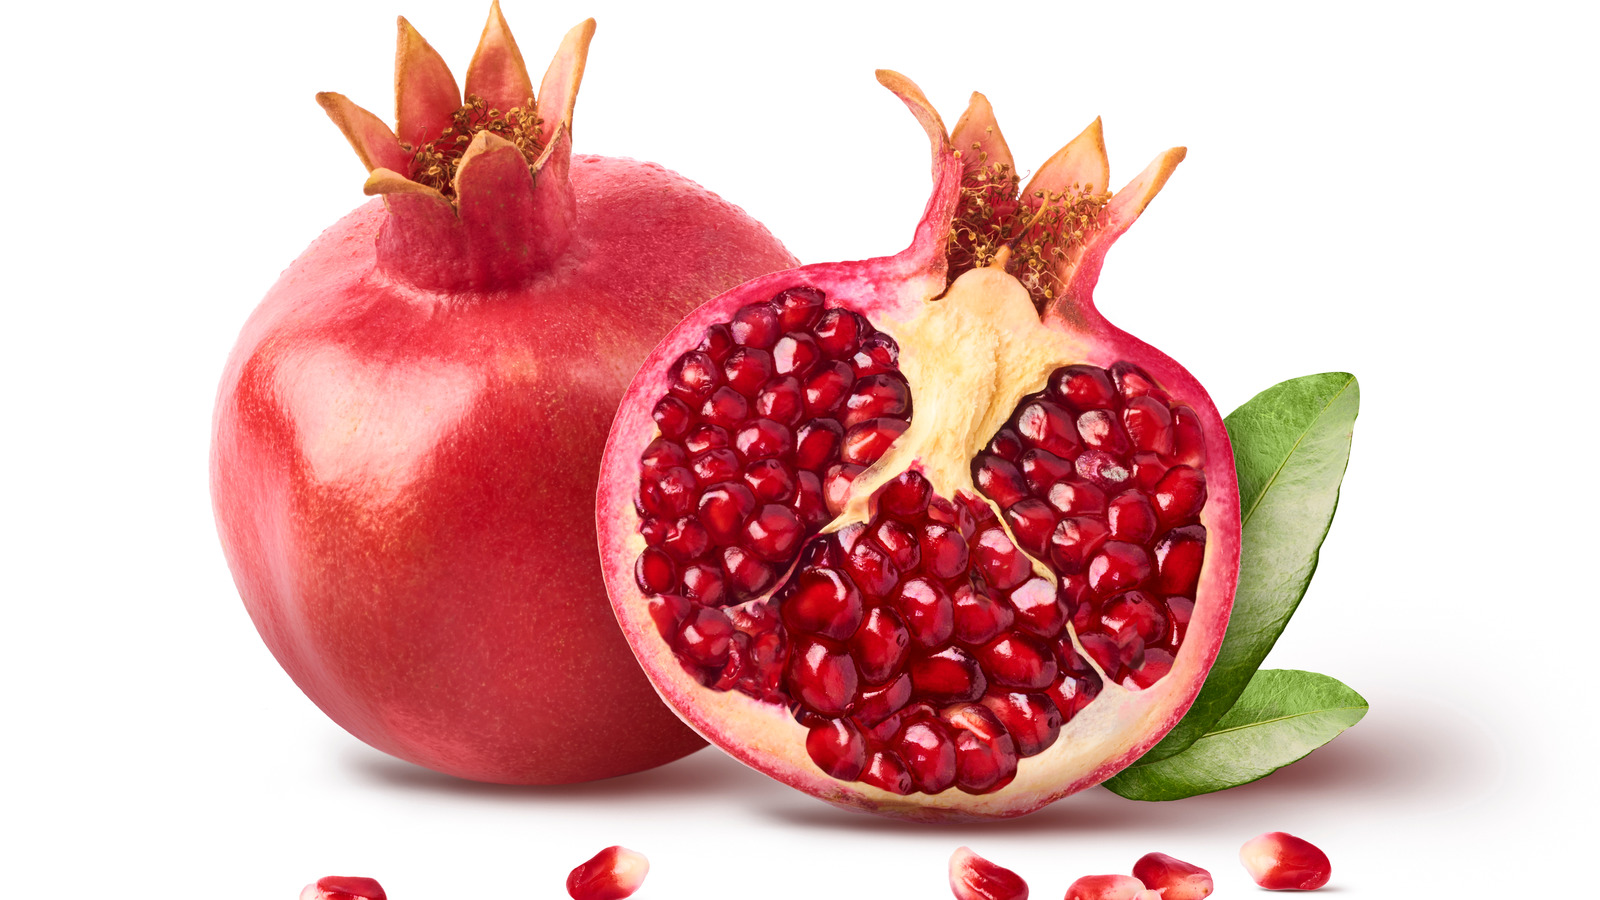 When You Eat Pomegranate Seeds, This Is What Happens To Your Body.